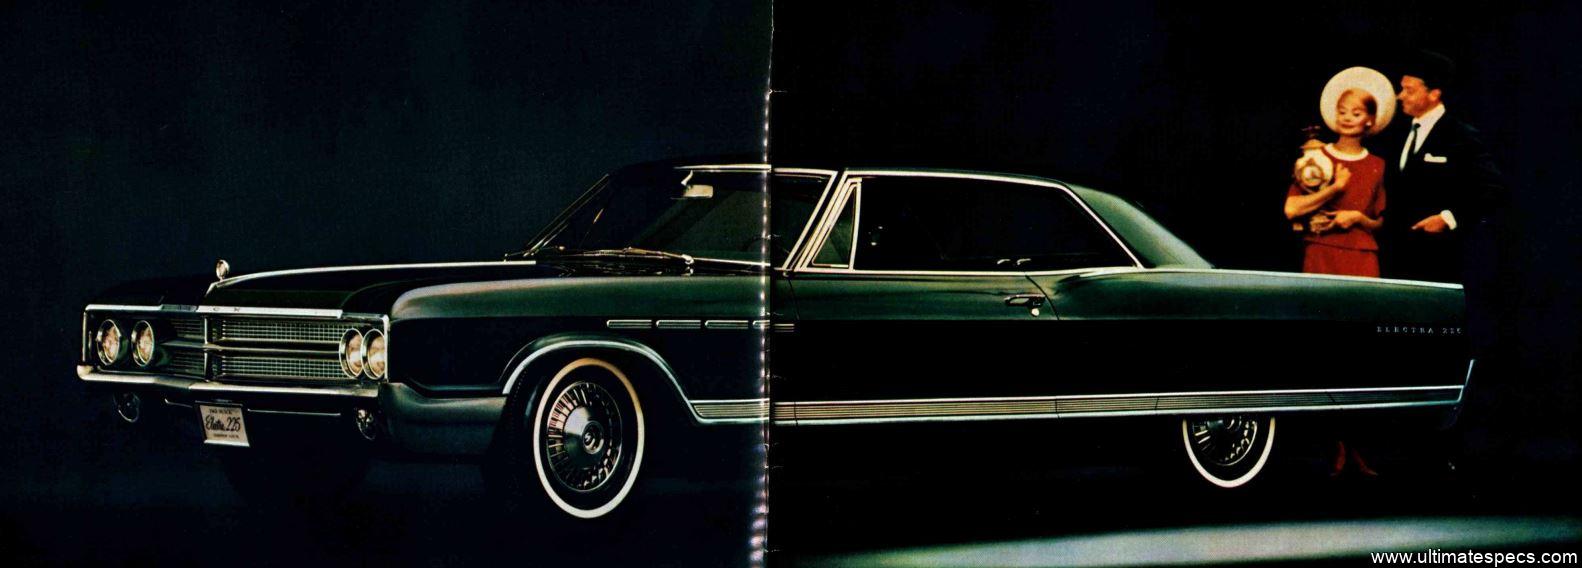 Buick Electra 225 Sport Coupe 1965